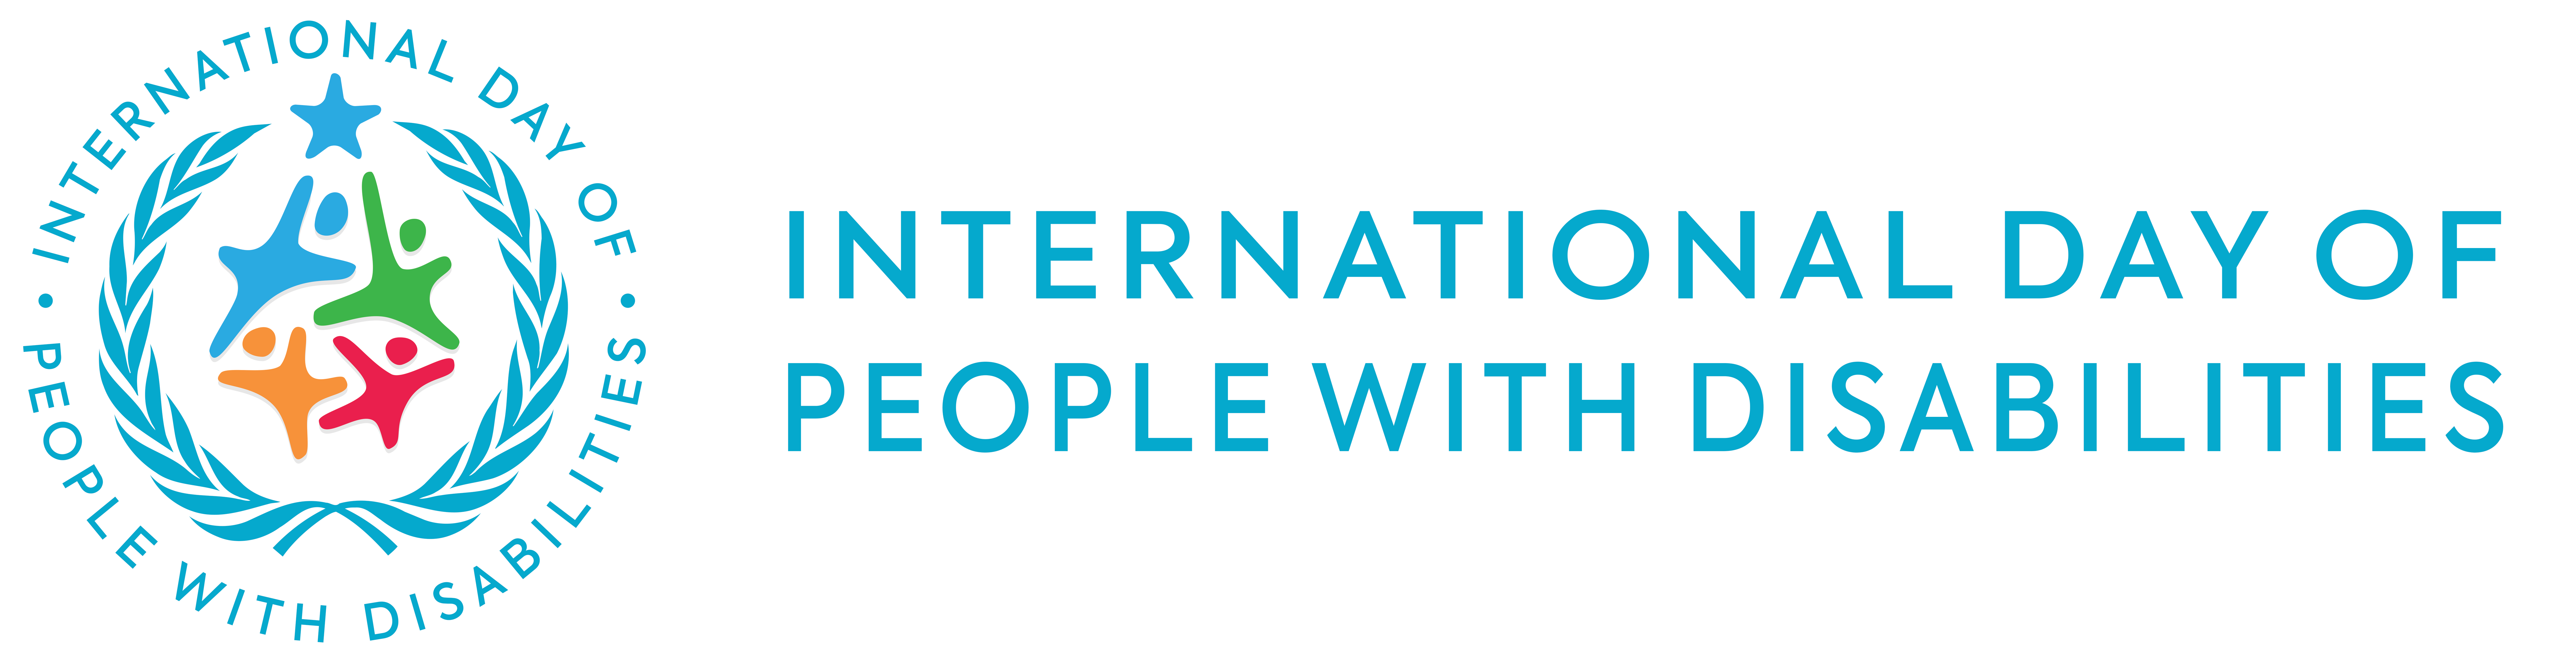 International Day of People With Disabilities Logo